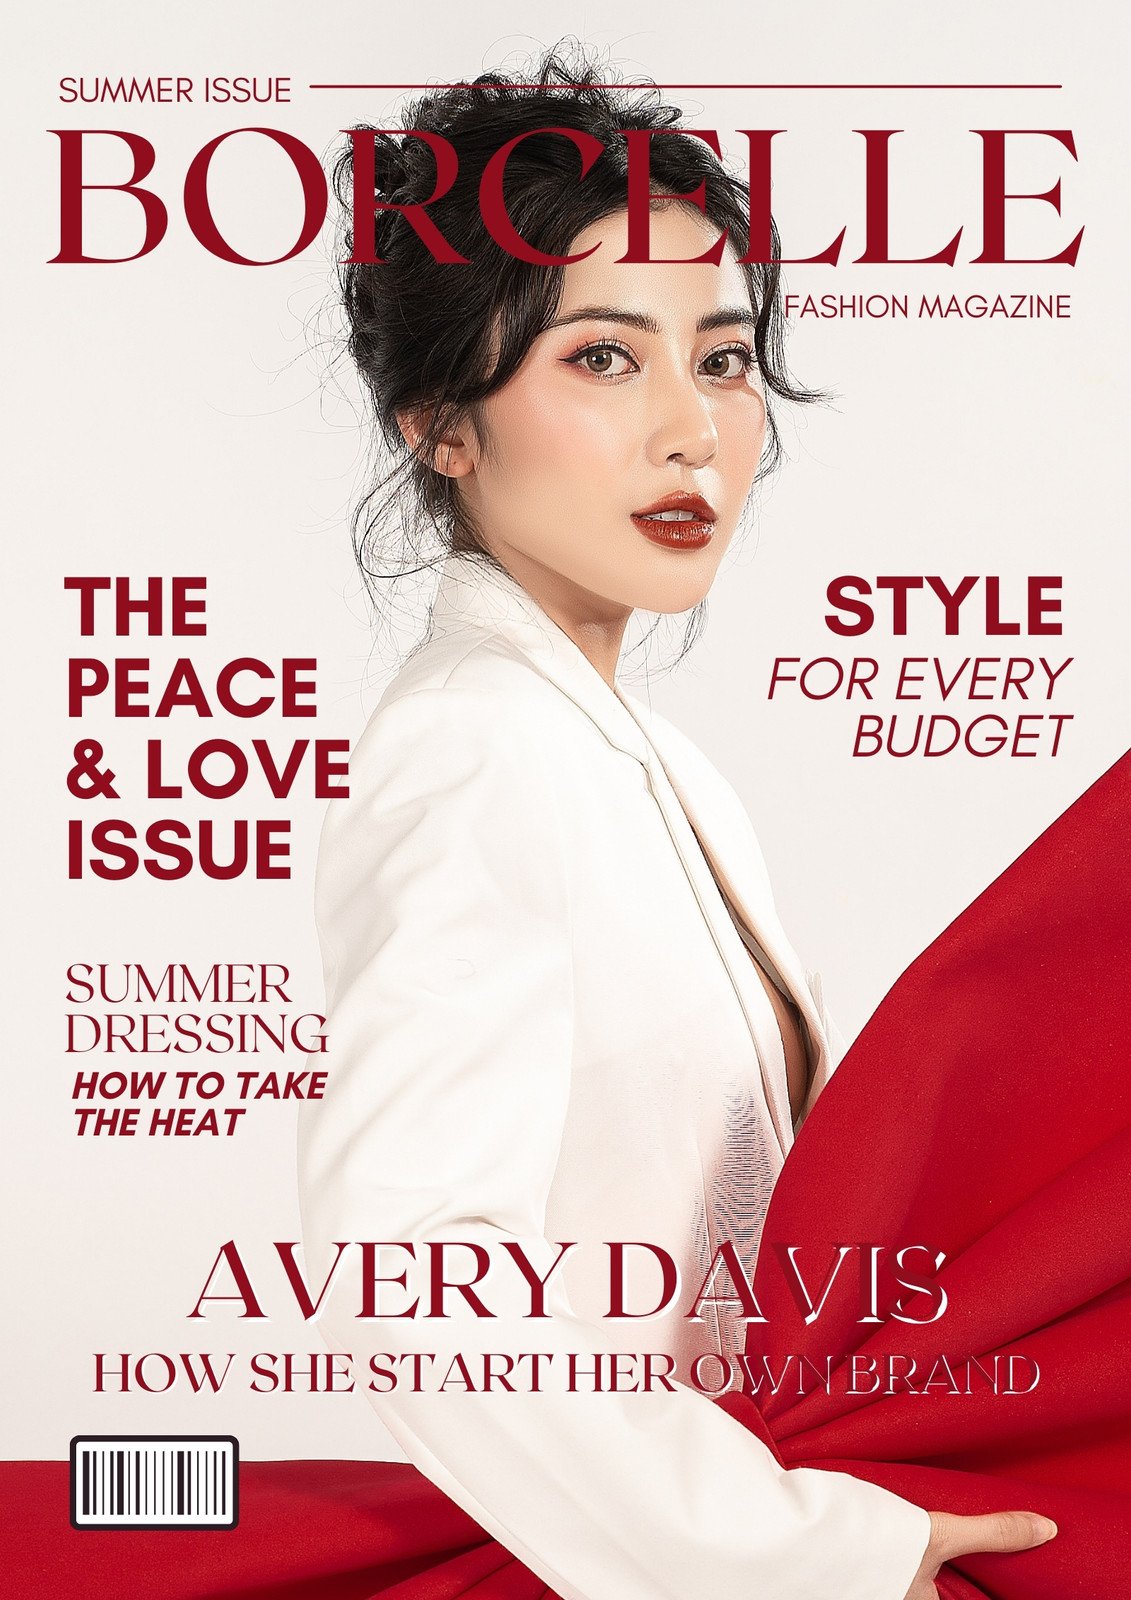 Free beautiful magazine covers you can customize | Canva